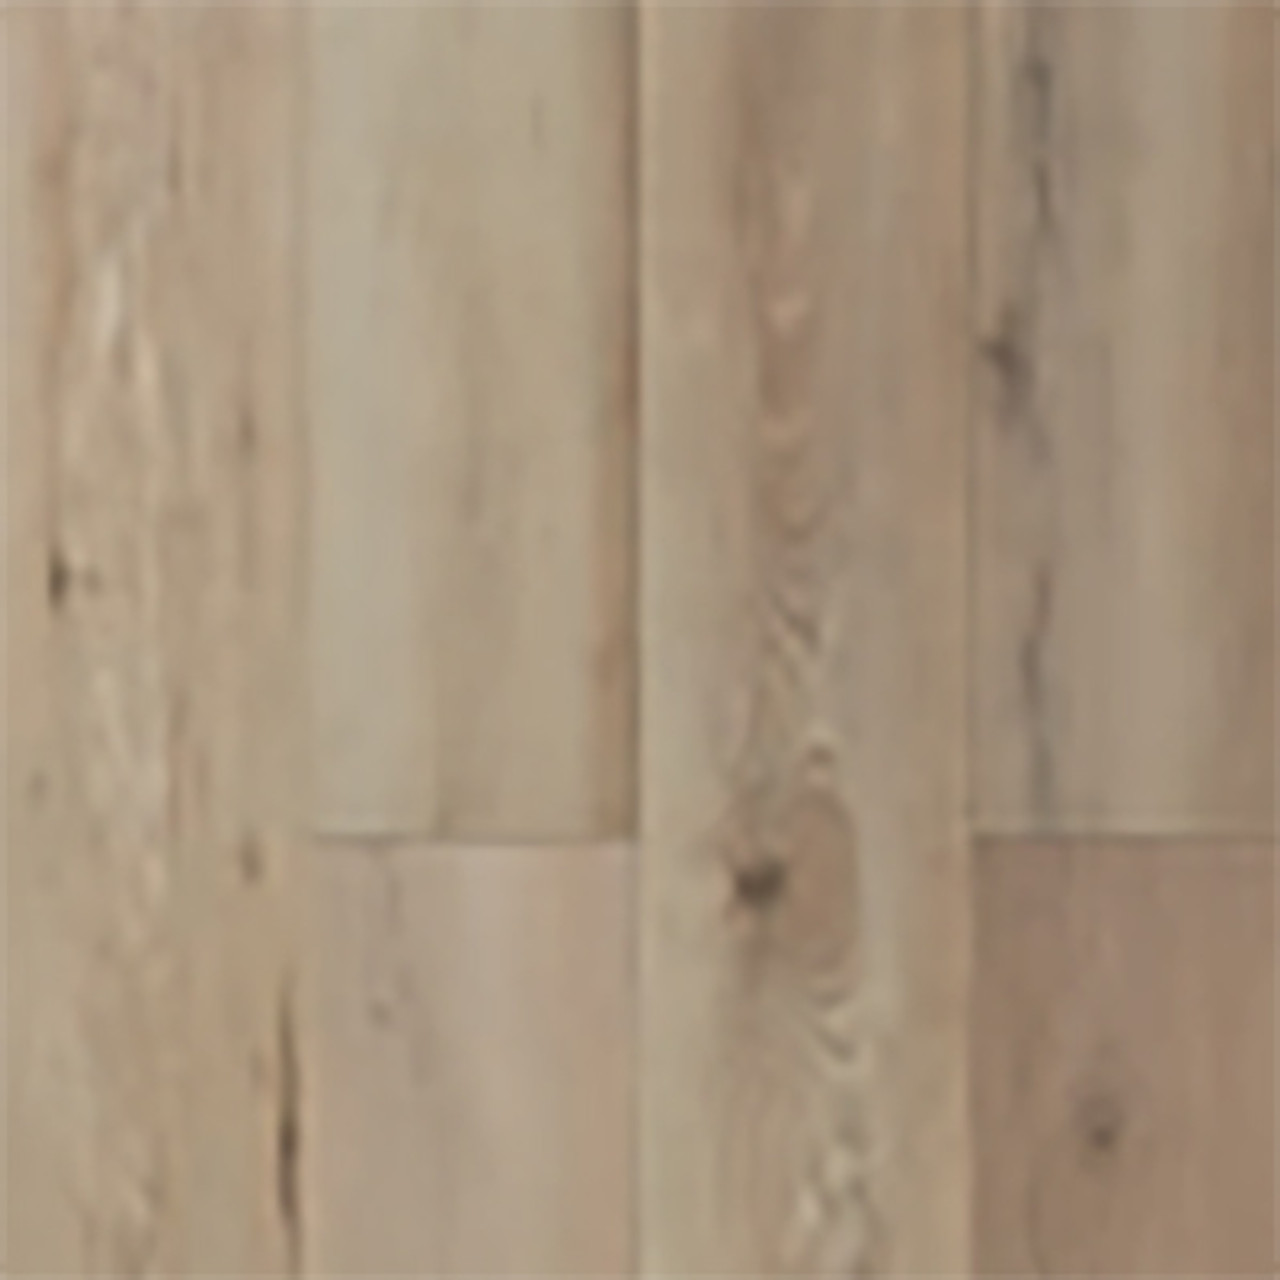 12mm Diana Bell Laminate Flooring | 21.58 Sq.Ft. Per Box | Sold by the Box